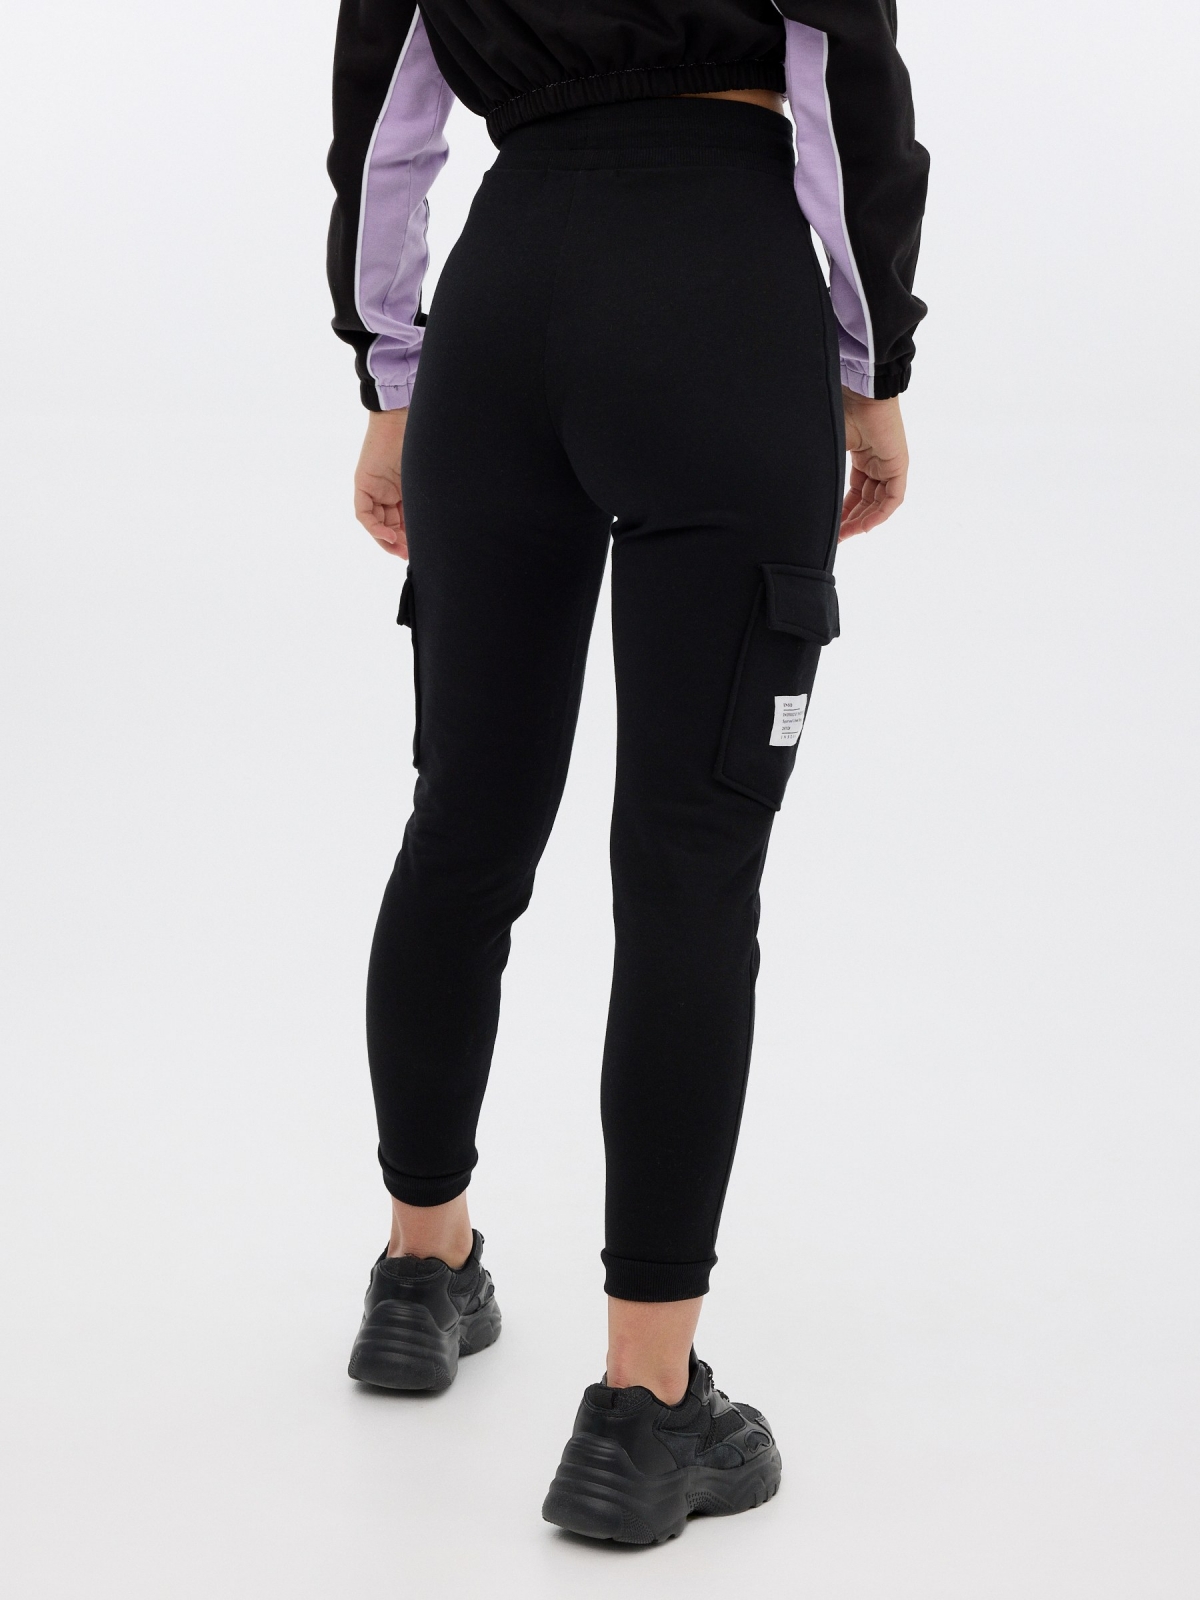 Black jogger pants with pockets black middle back view